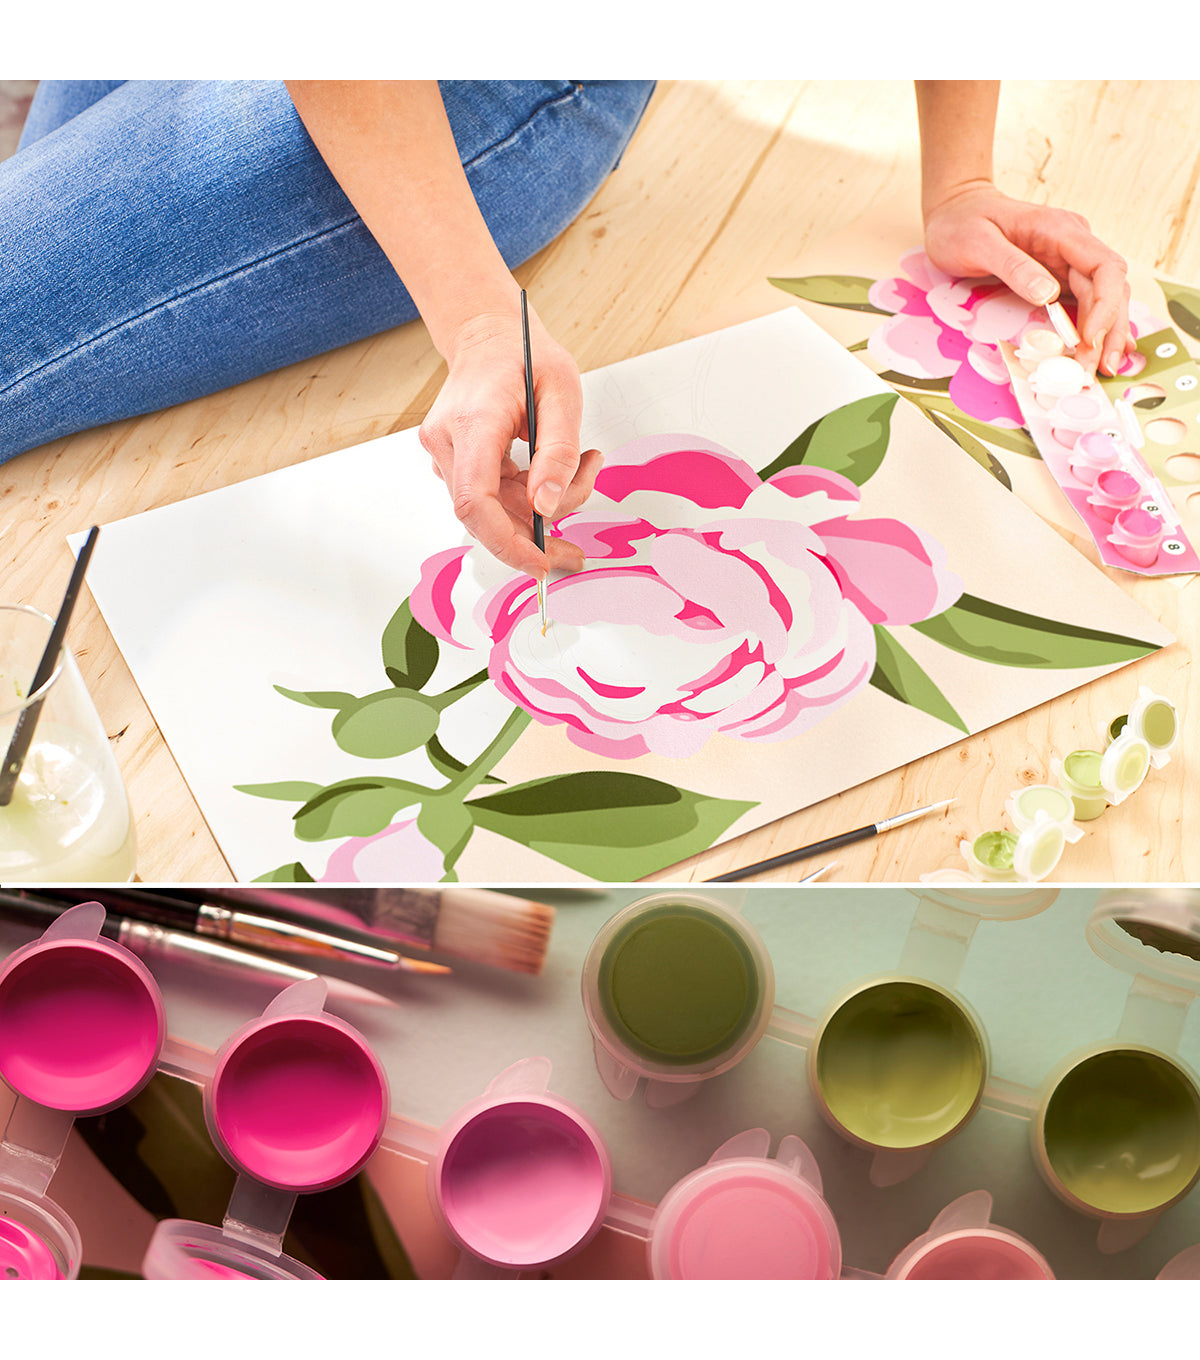 Paint by Numbers, Floral - Beginner Level Kit